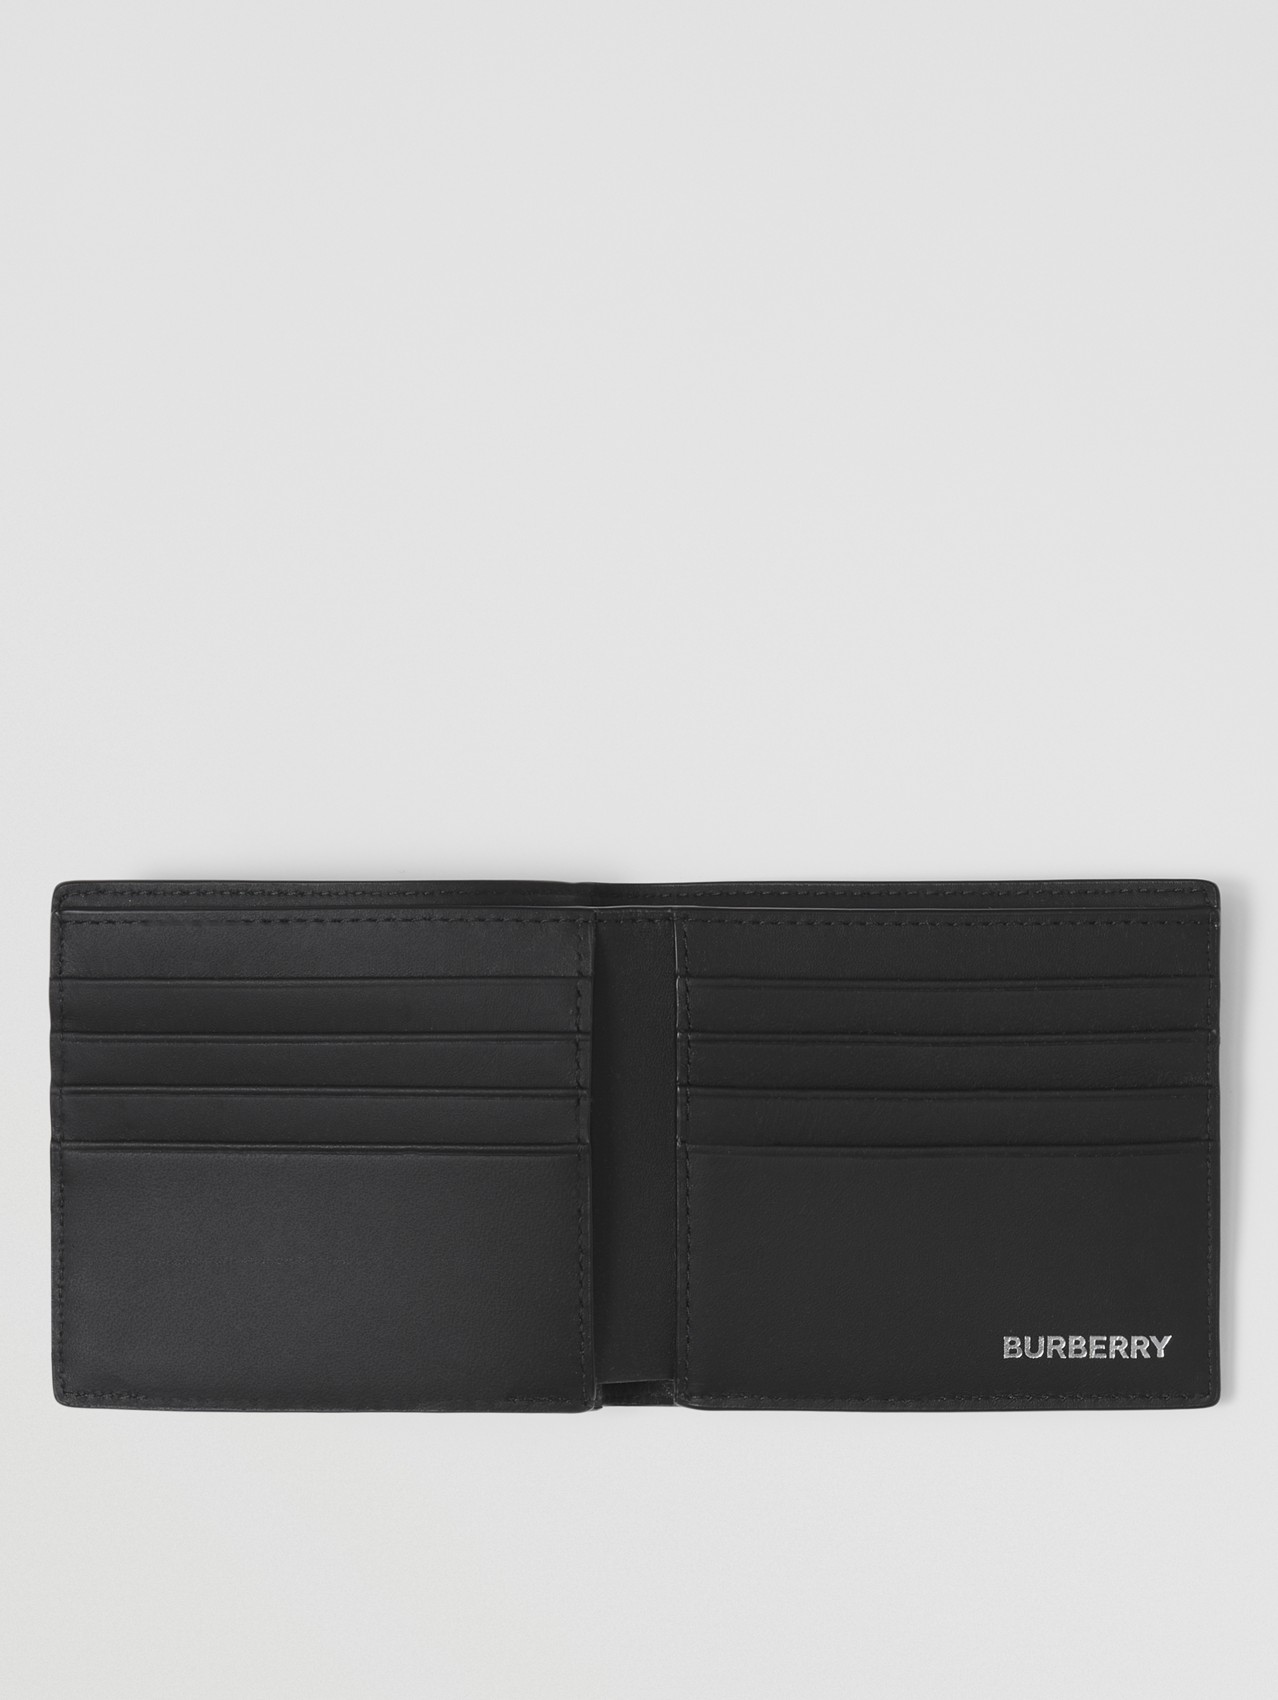 London Check and Leather International Bifold Wallet in Dark Charcoal